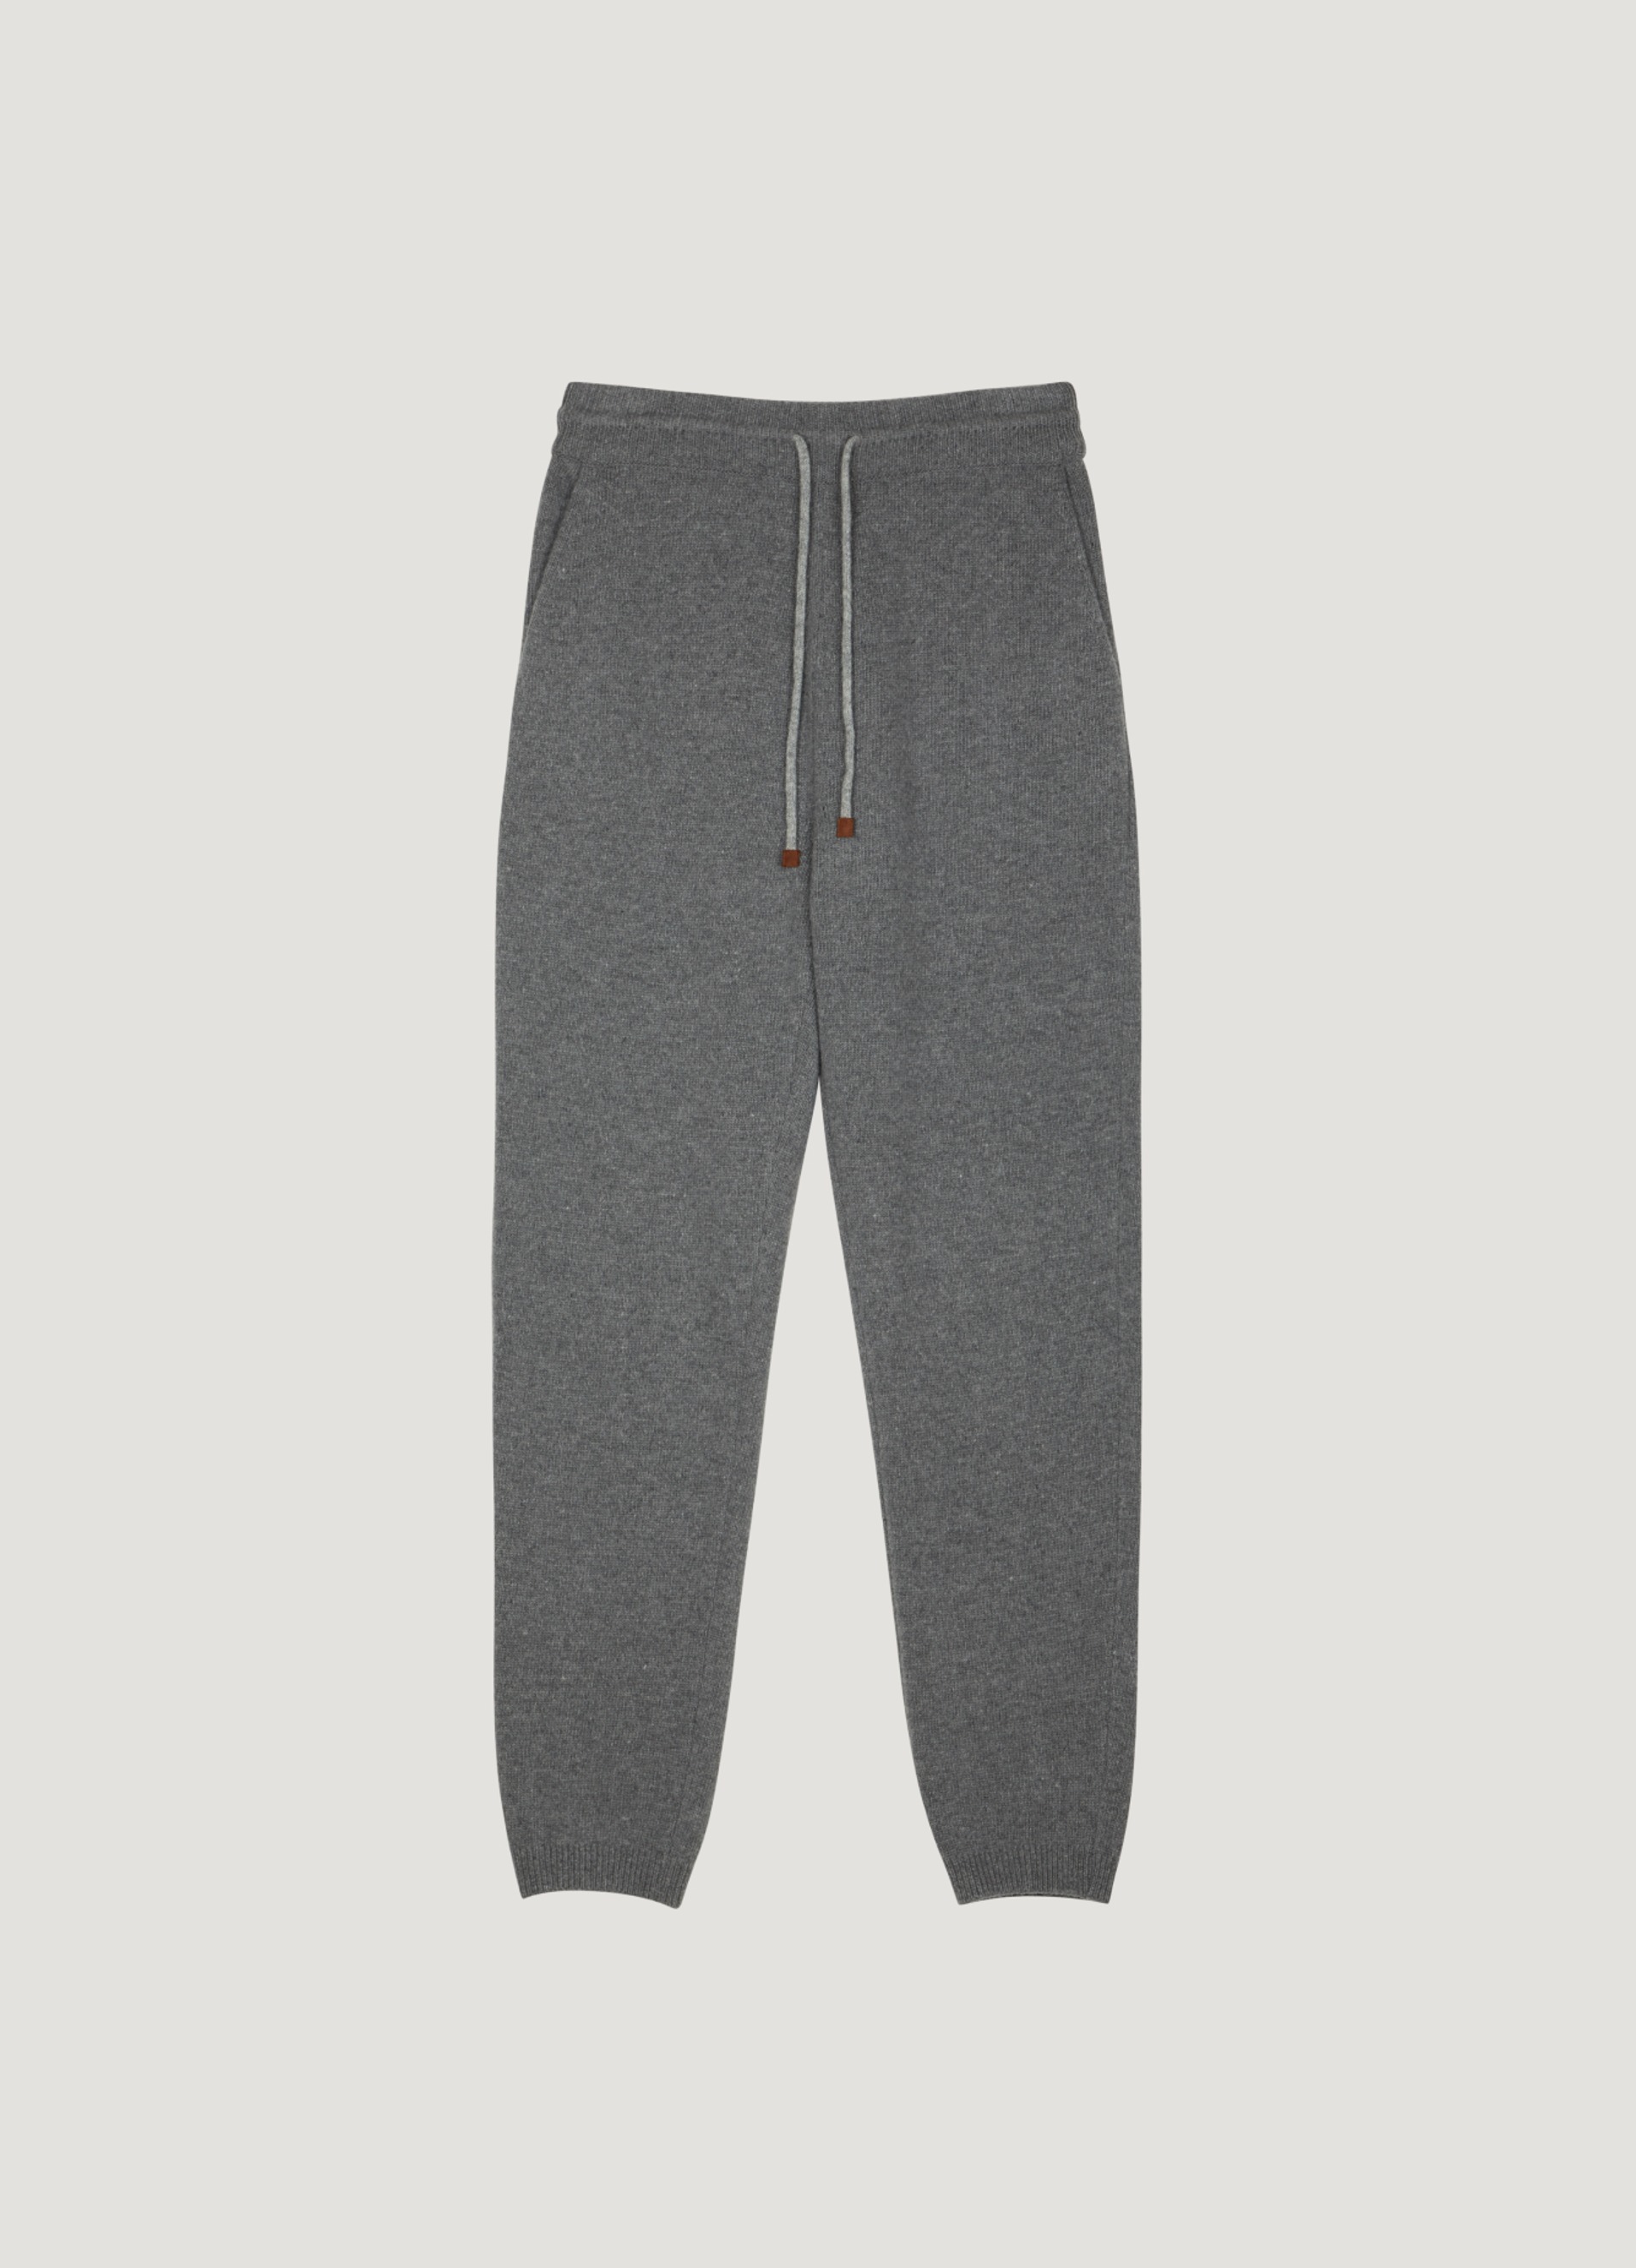 Cashmere Blend Knit Pants (Melange Gray) Out Of Stock